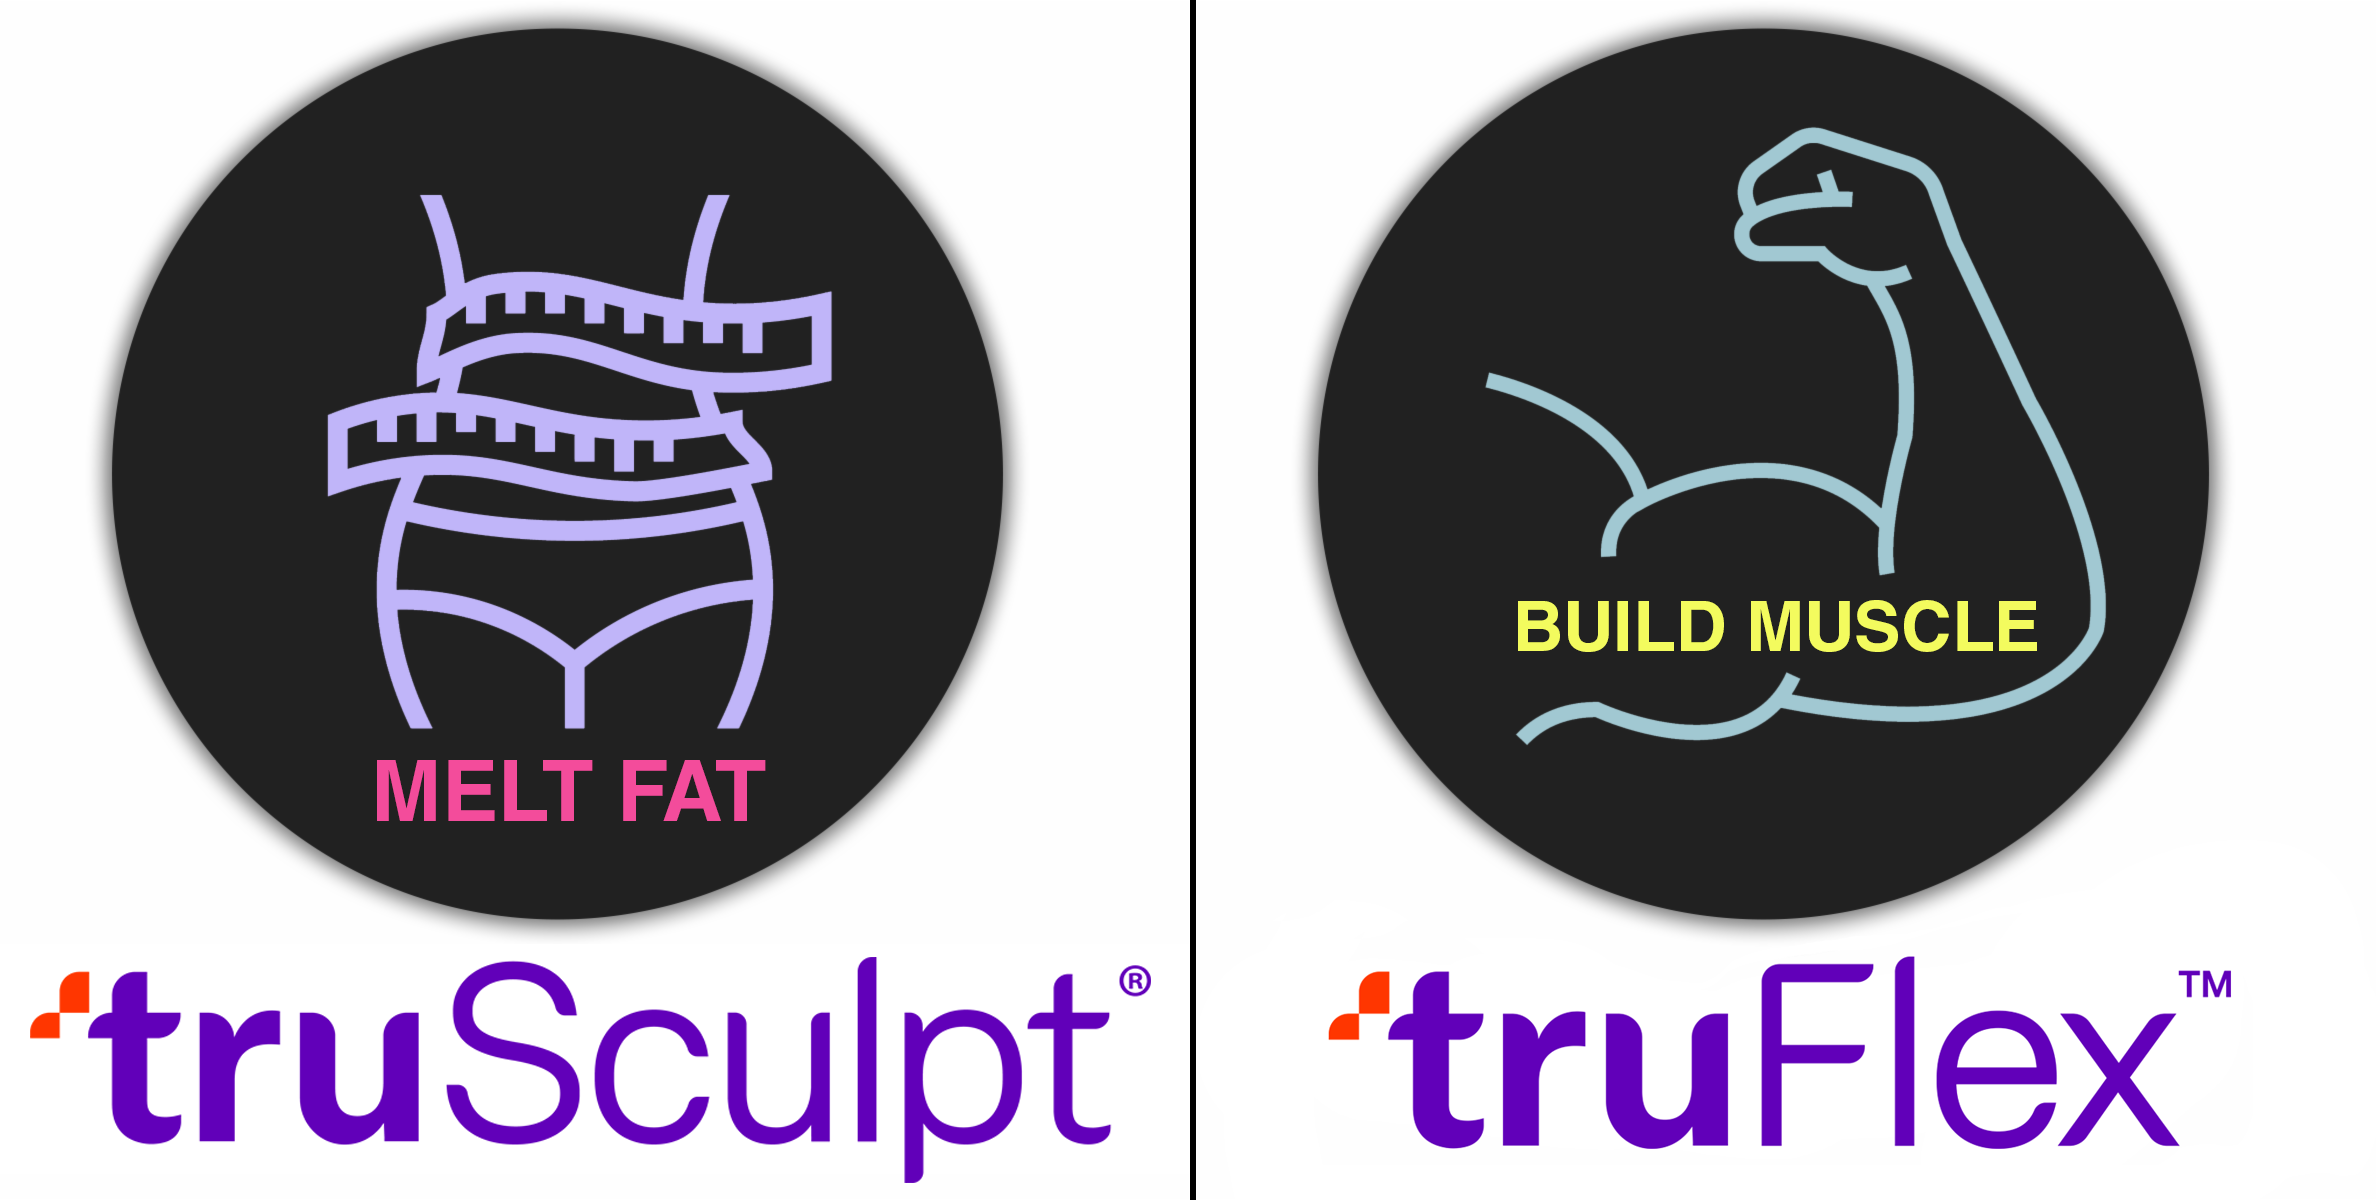 Achieve your dream summer body with TruSculpt for fat reduction and TruFlex for muscle sculpting at Lip Doctor.